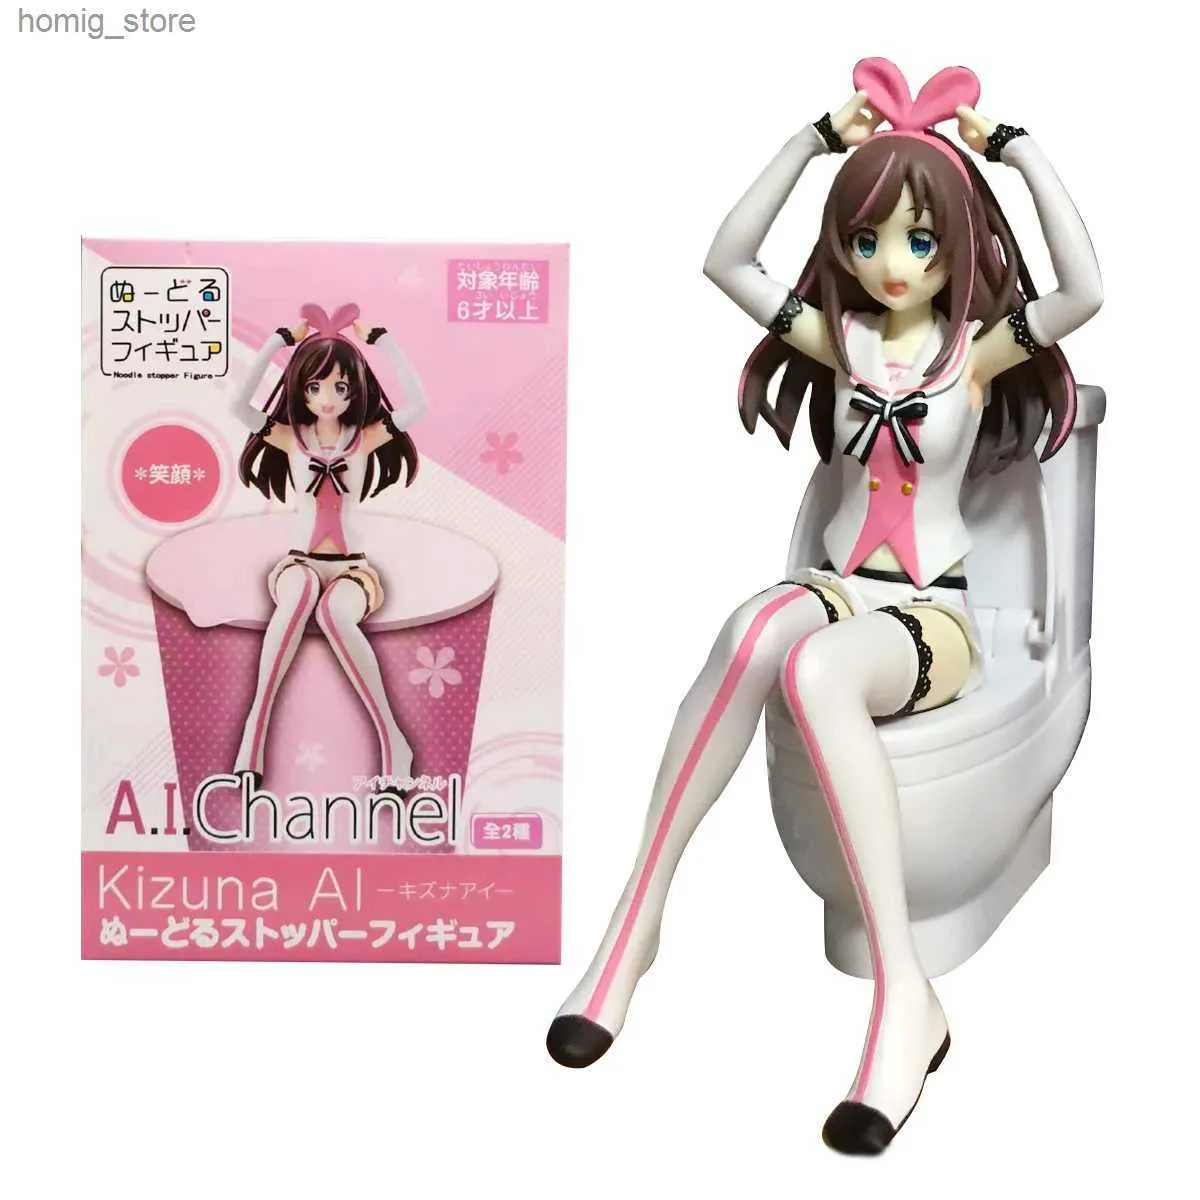 Action Toy Figures New Anime Kizuna Ai Figur Instant Noodle Pressure Virtual Singer Princess Costume JK Sitting Girl Doll Ornament Gift Toy Model Y240415